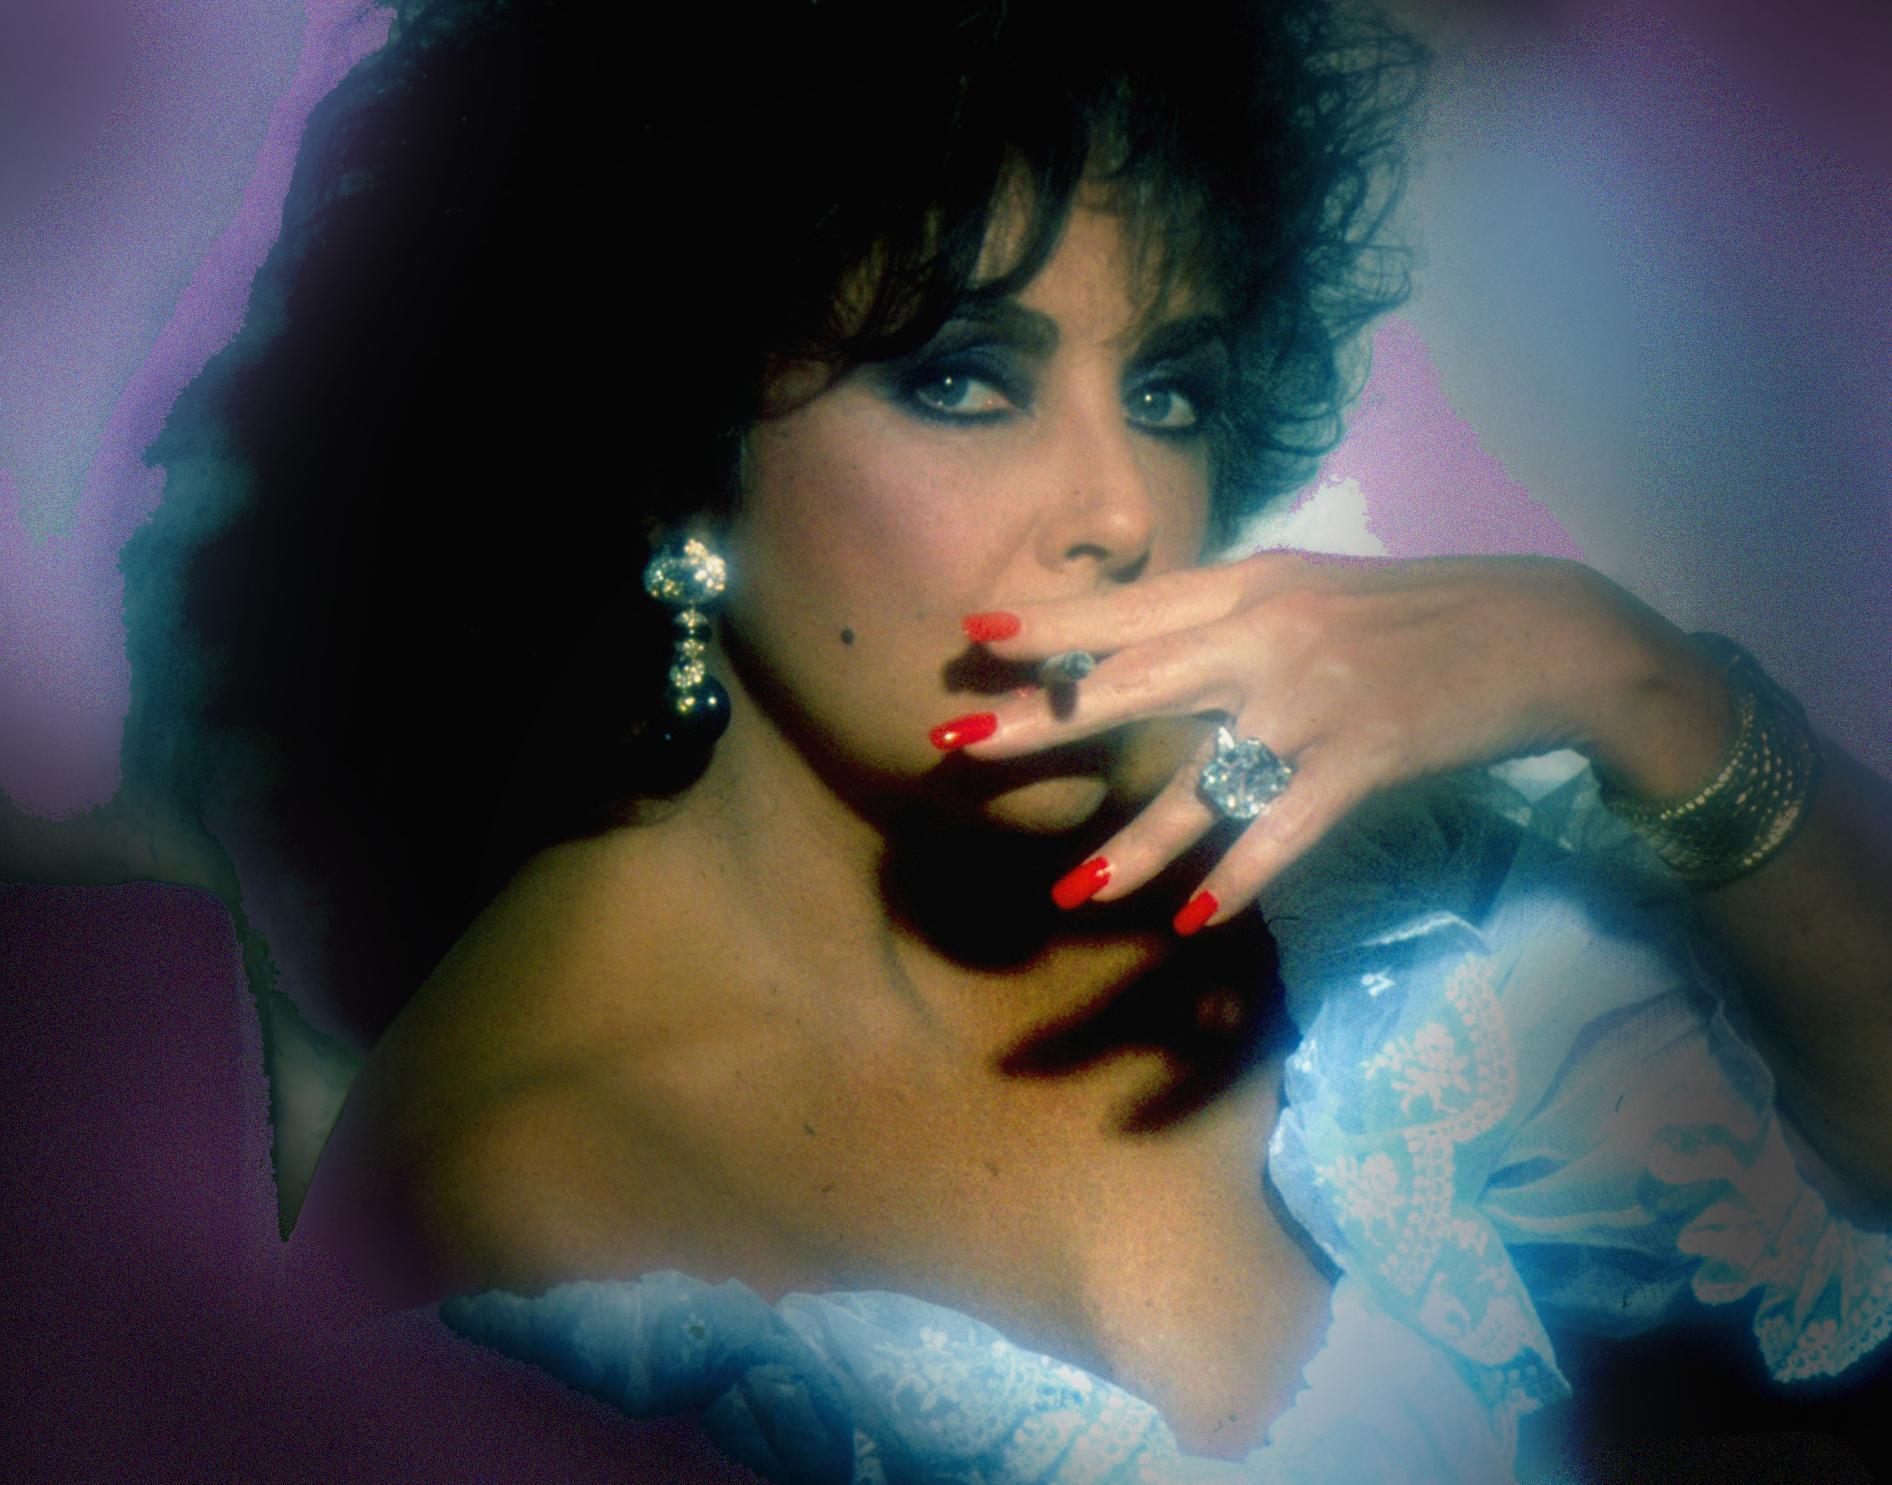 Gary Bernstein Portrait Photograph - Elizabeth Taylor Smoking Stucco v4 (...a large canvas; see other sizes below)